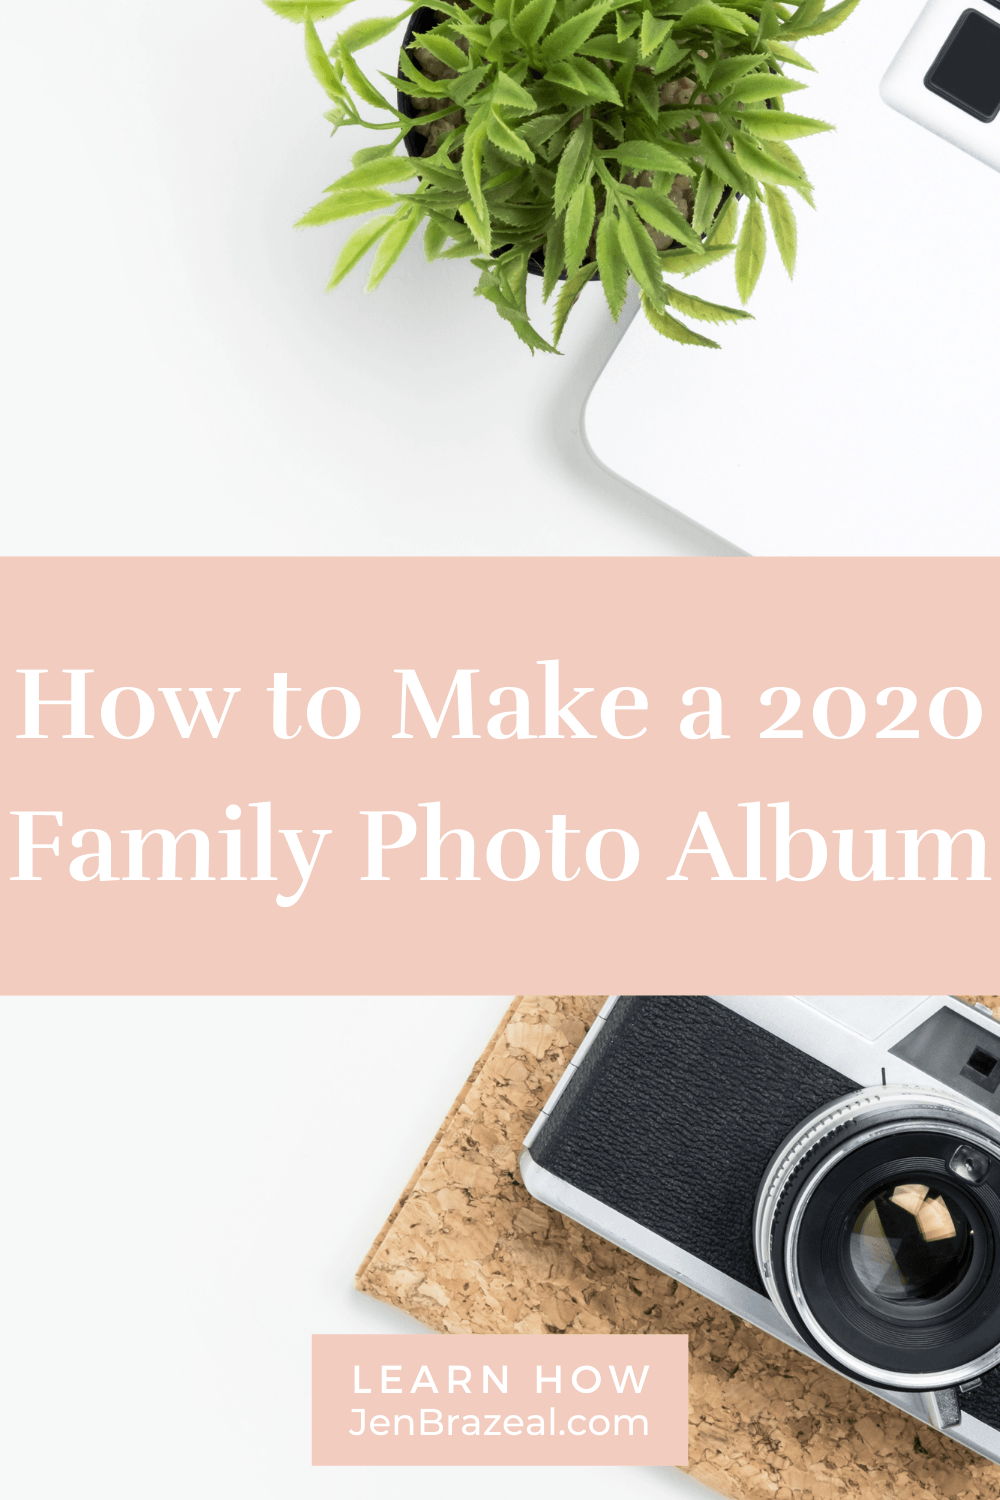 How to make a 2020 family photo album | The Unhurried Life 